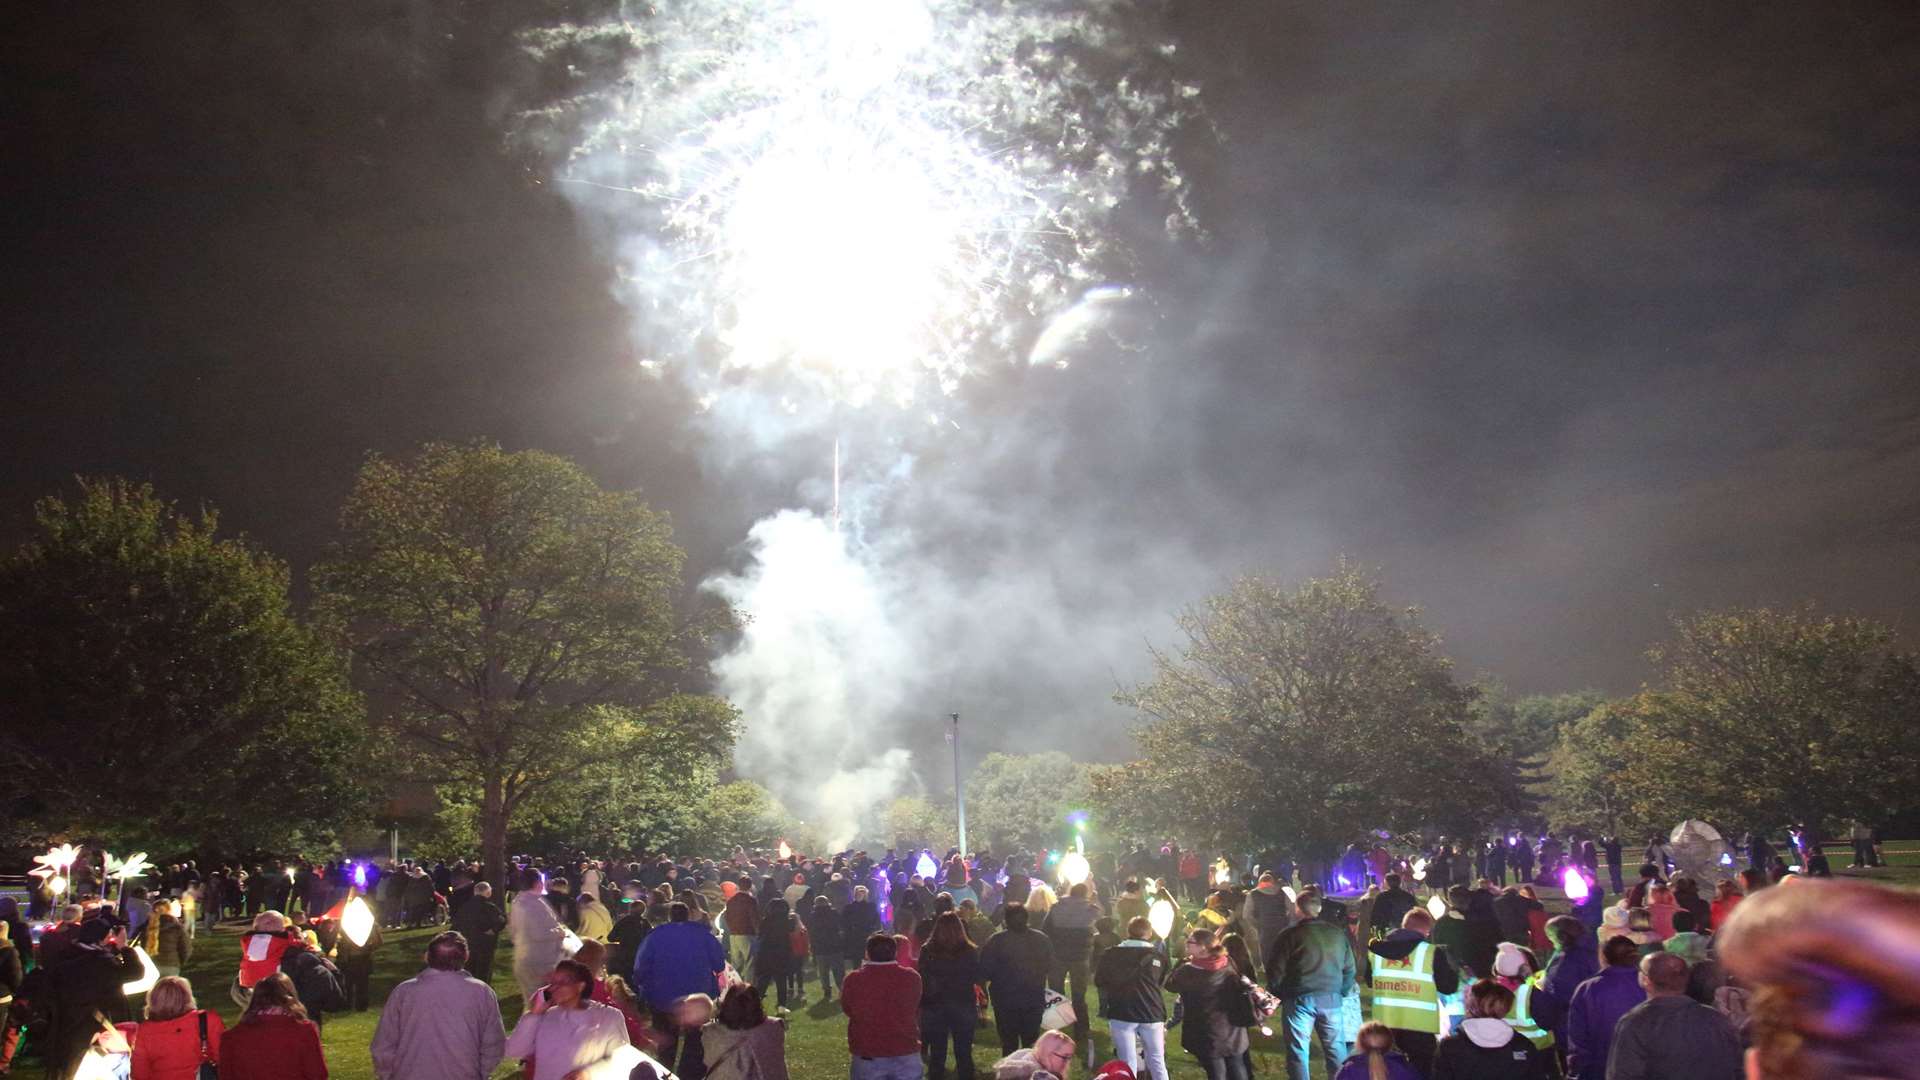 The festival closed with a fireworks display in Central Park.